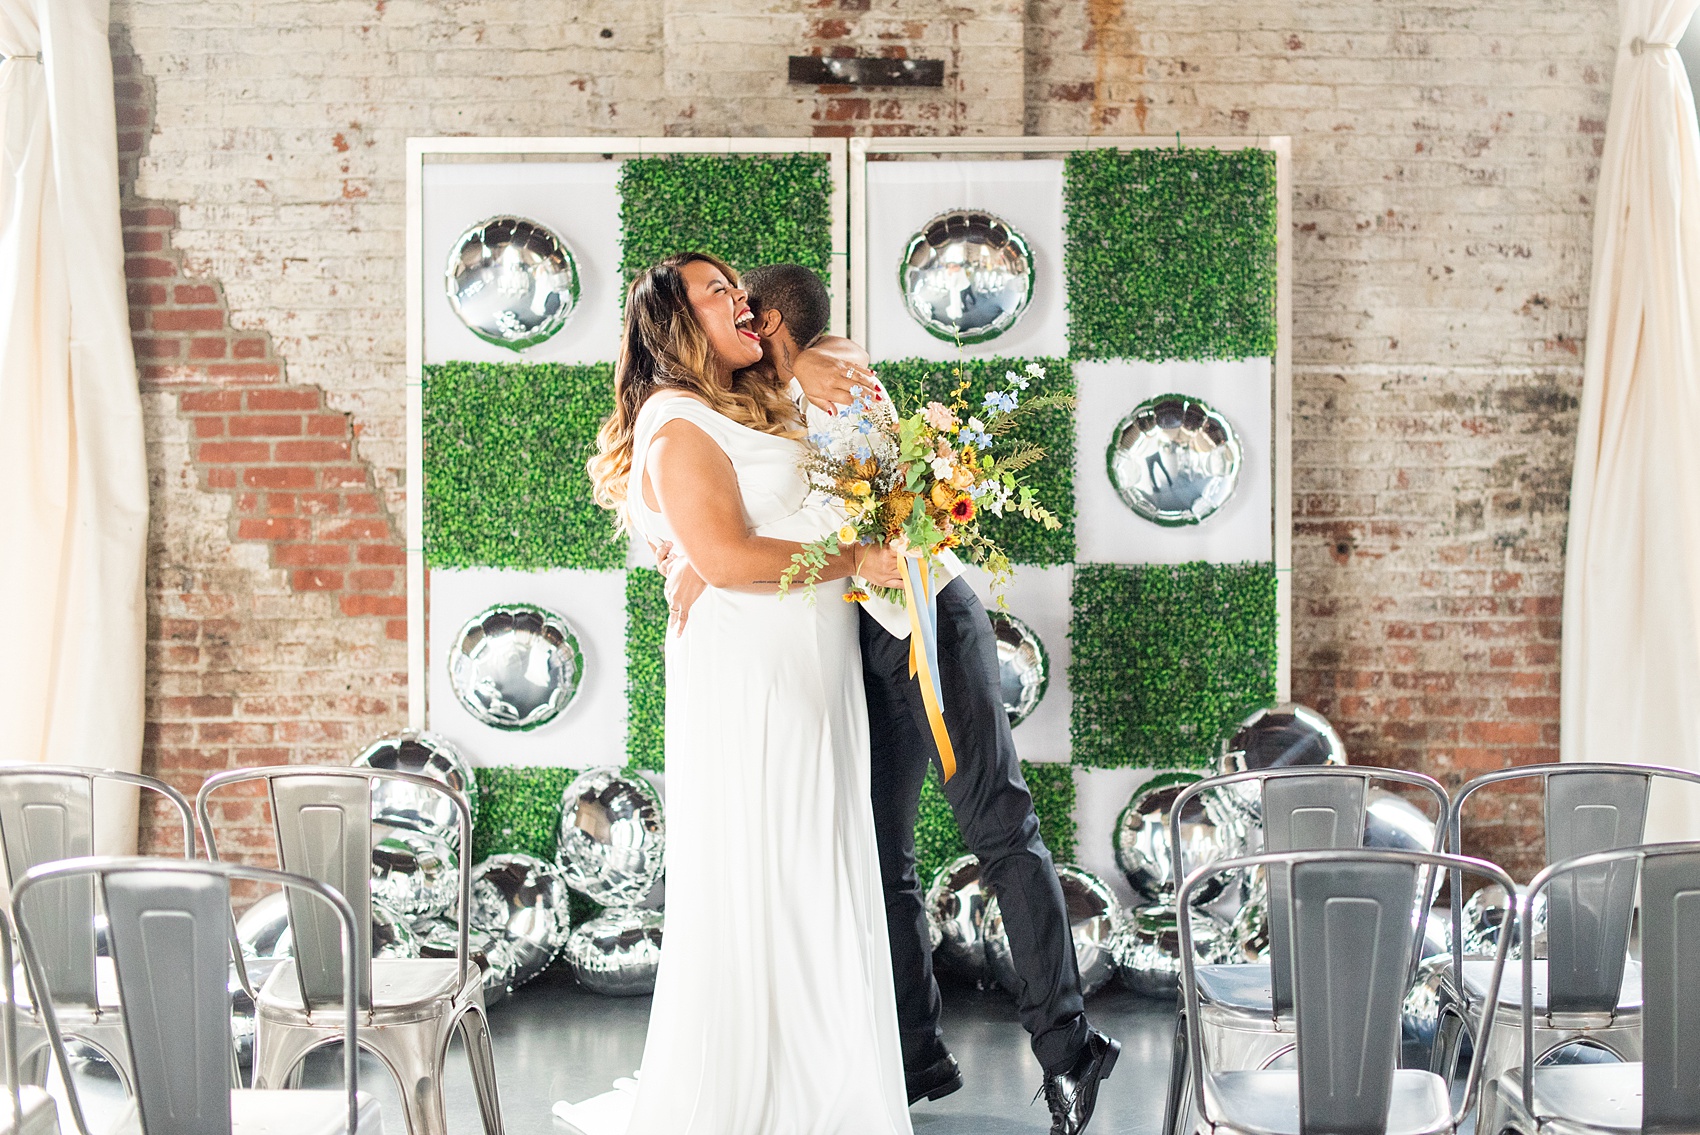 Mikkel Paige Photography photos of a wedding at the Green Building in Brooklyn, New York. This same sex, gay marriage styled shoot was created by Color Pop Events. They recited vows during their ceremony in front of silver mylar balloons and green square boxwood patches. The bride wore a white, silk cowl neck gown and the bride groom in a white coat with colorful bow tie.